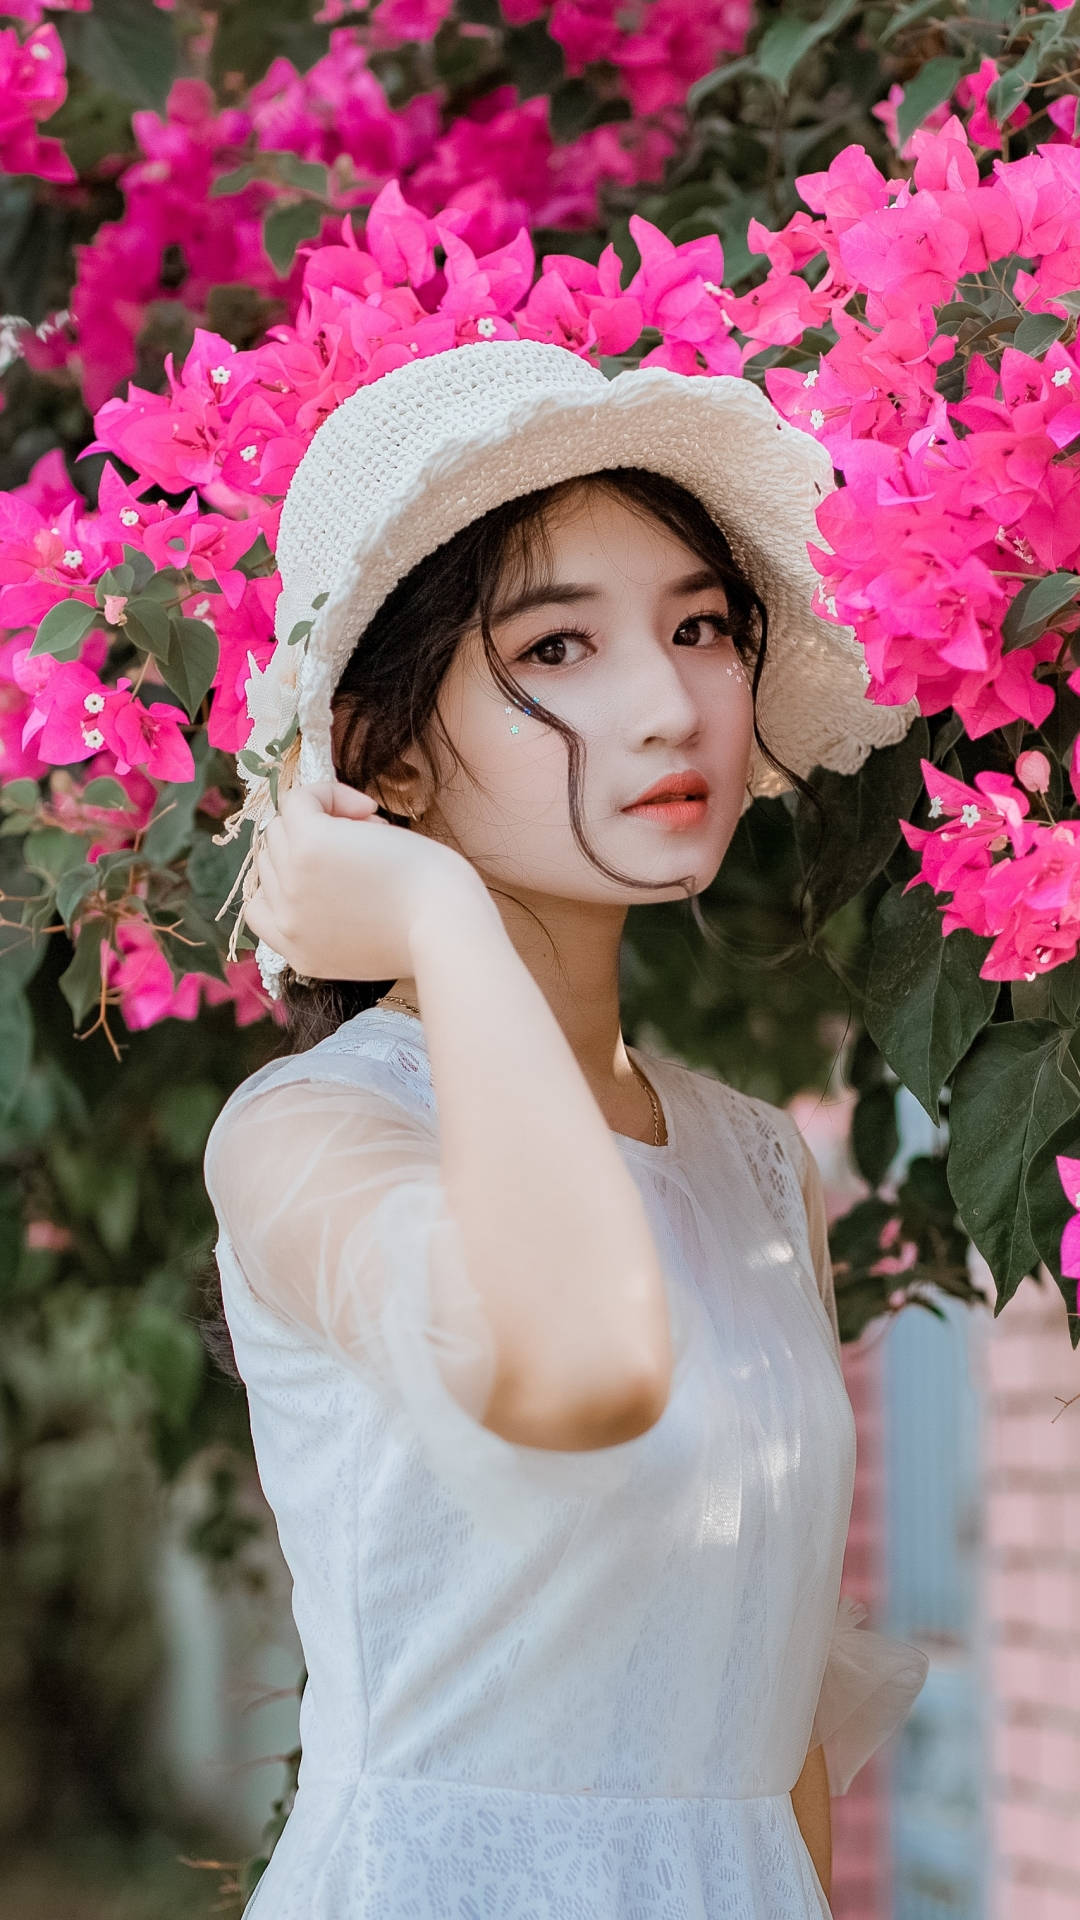 Asian Women Posing By The Flowers Background